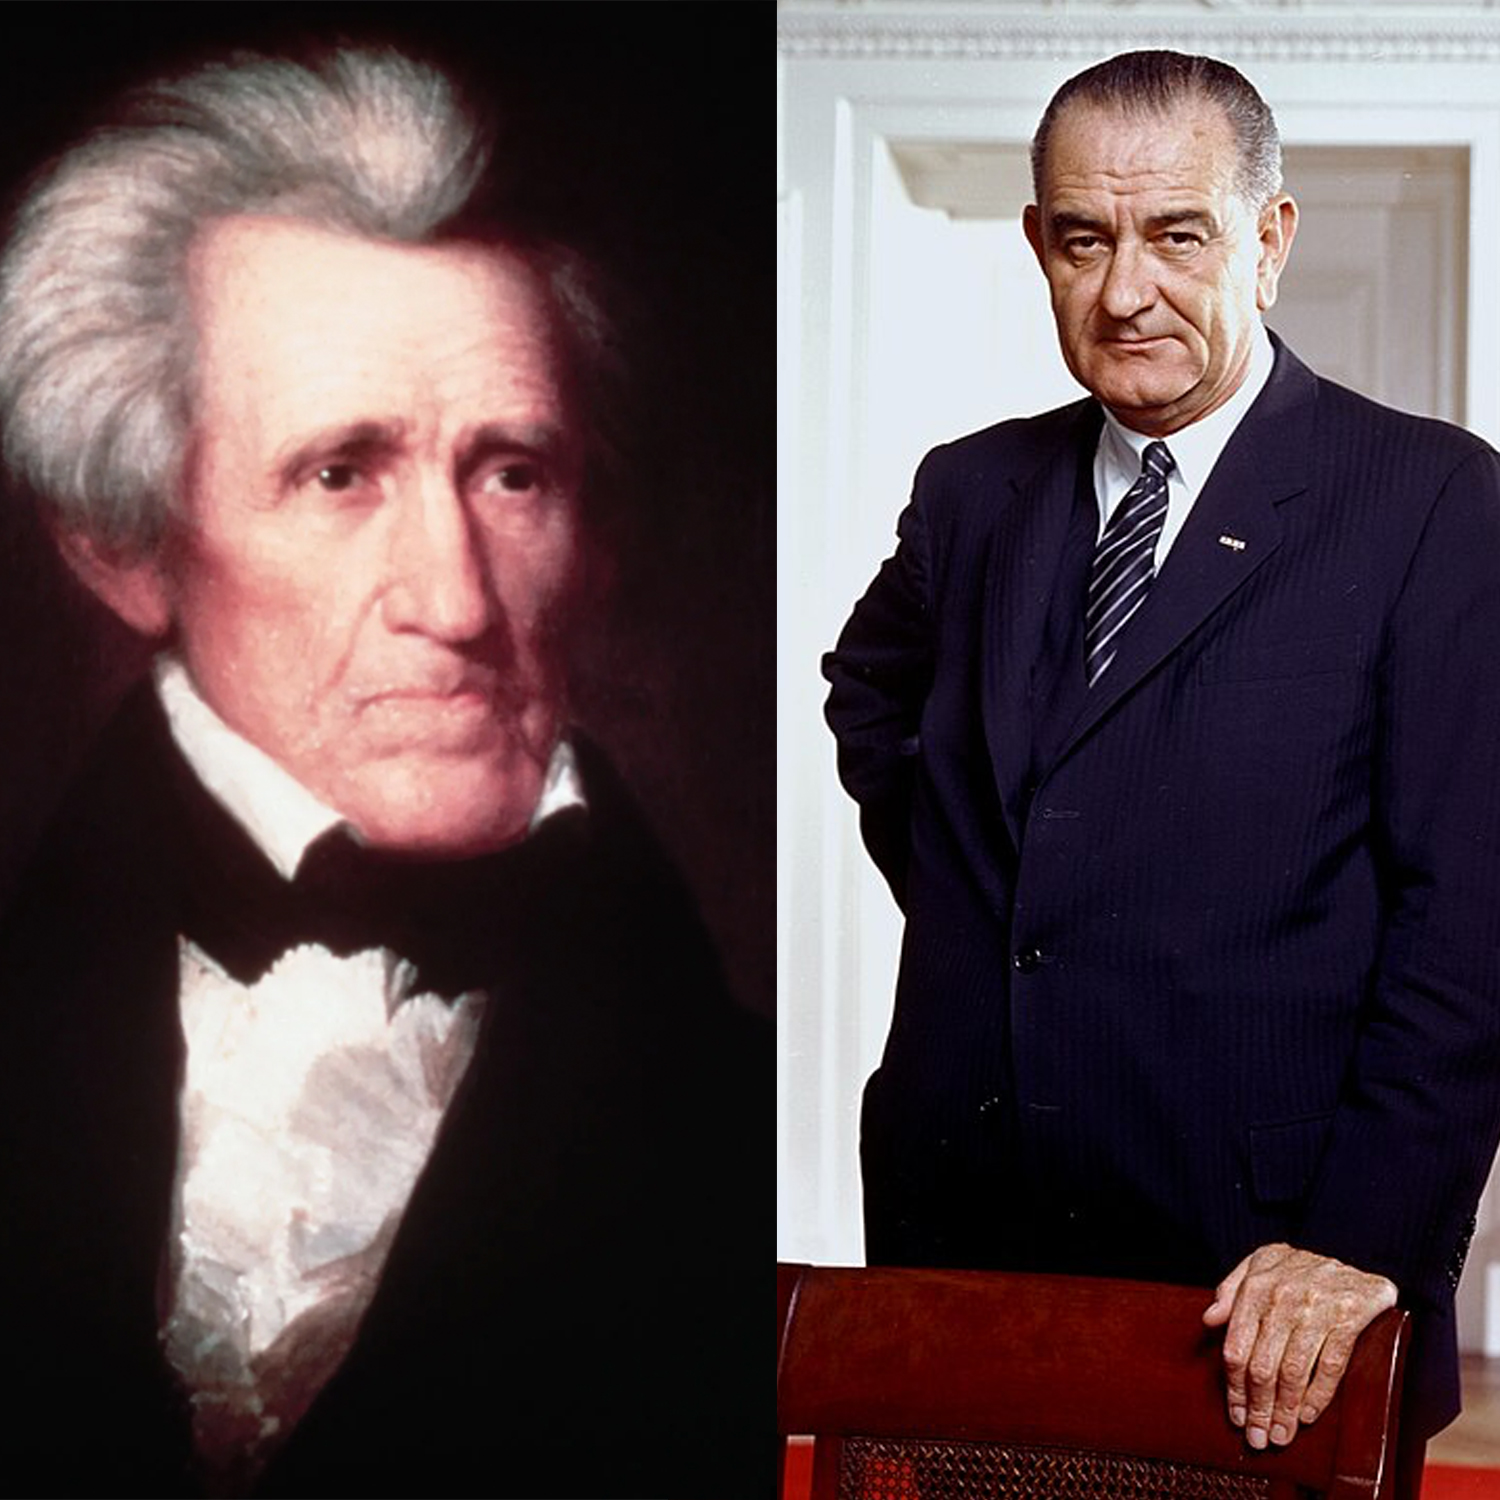 “Andrew Jackson. Committed full-on genocide of Native American, but remembered as a rags-to-riches and valiant president and general. Also, Lyndon B Johnson. He dragged his feet through the civil rights movement and only signed it when it was politically 